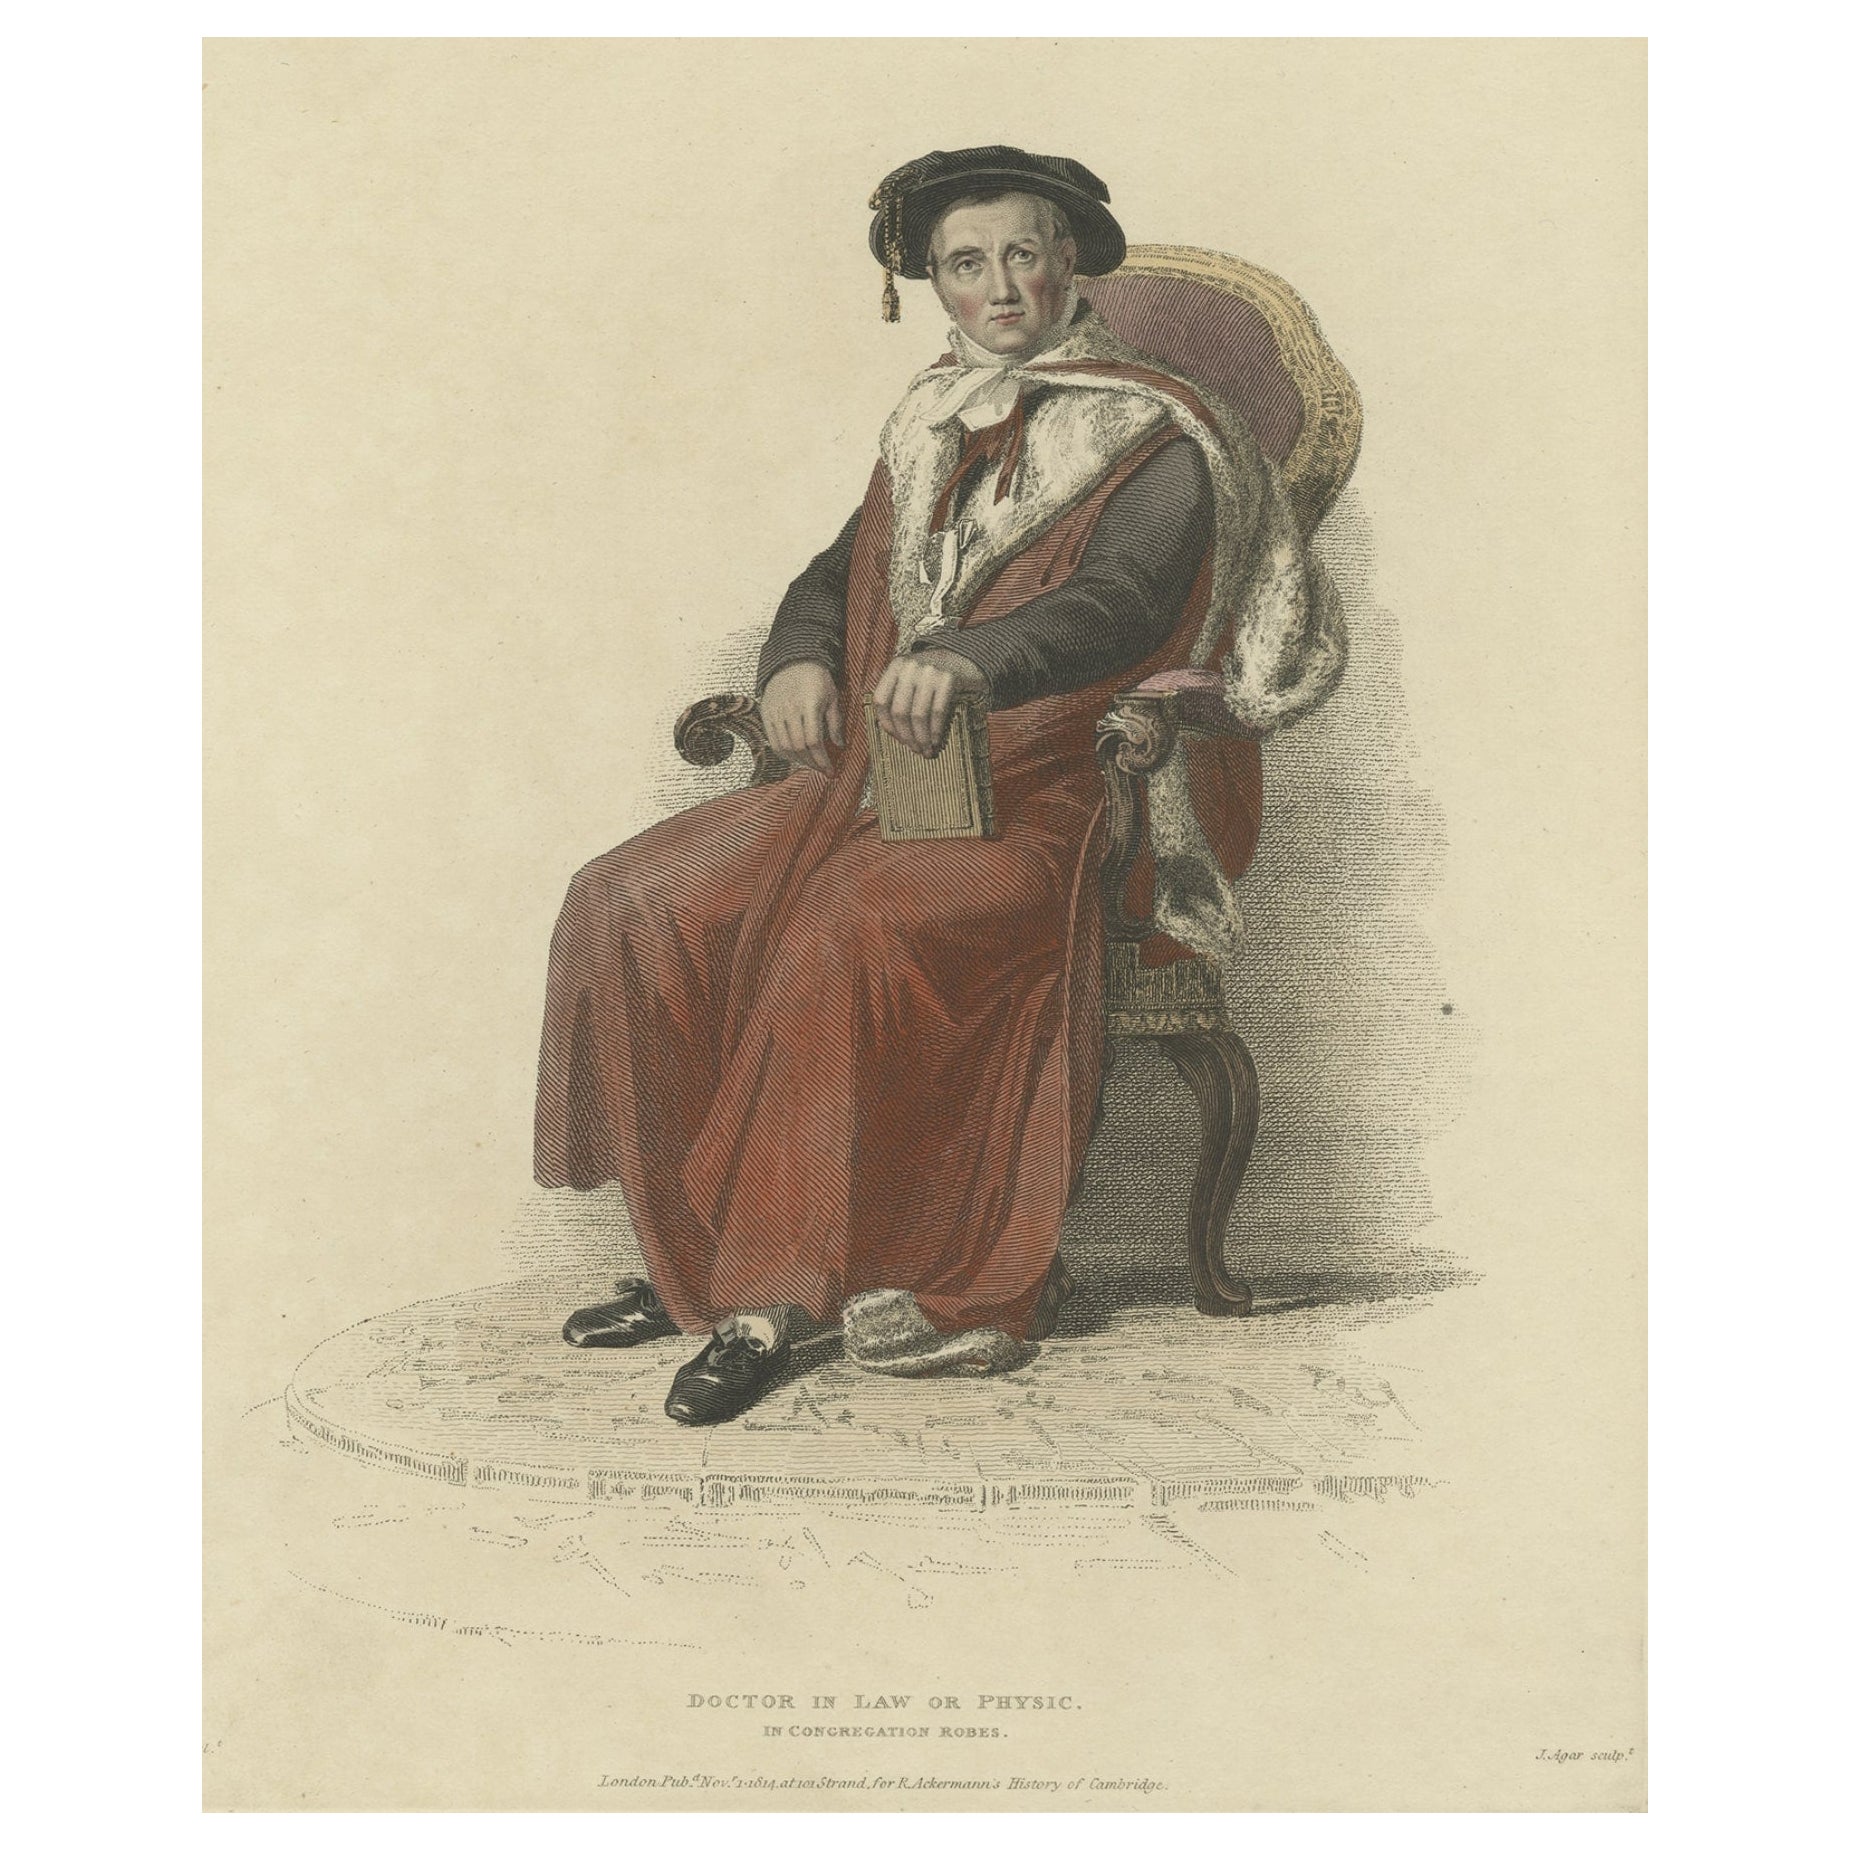 Old Hand-Colored Print of a Doctor in Law or Physic, in Congregation Robes, 1814